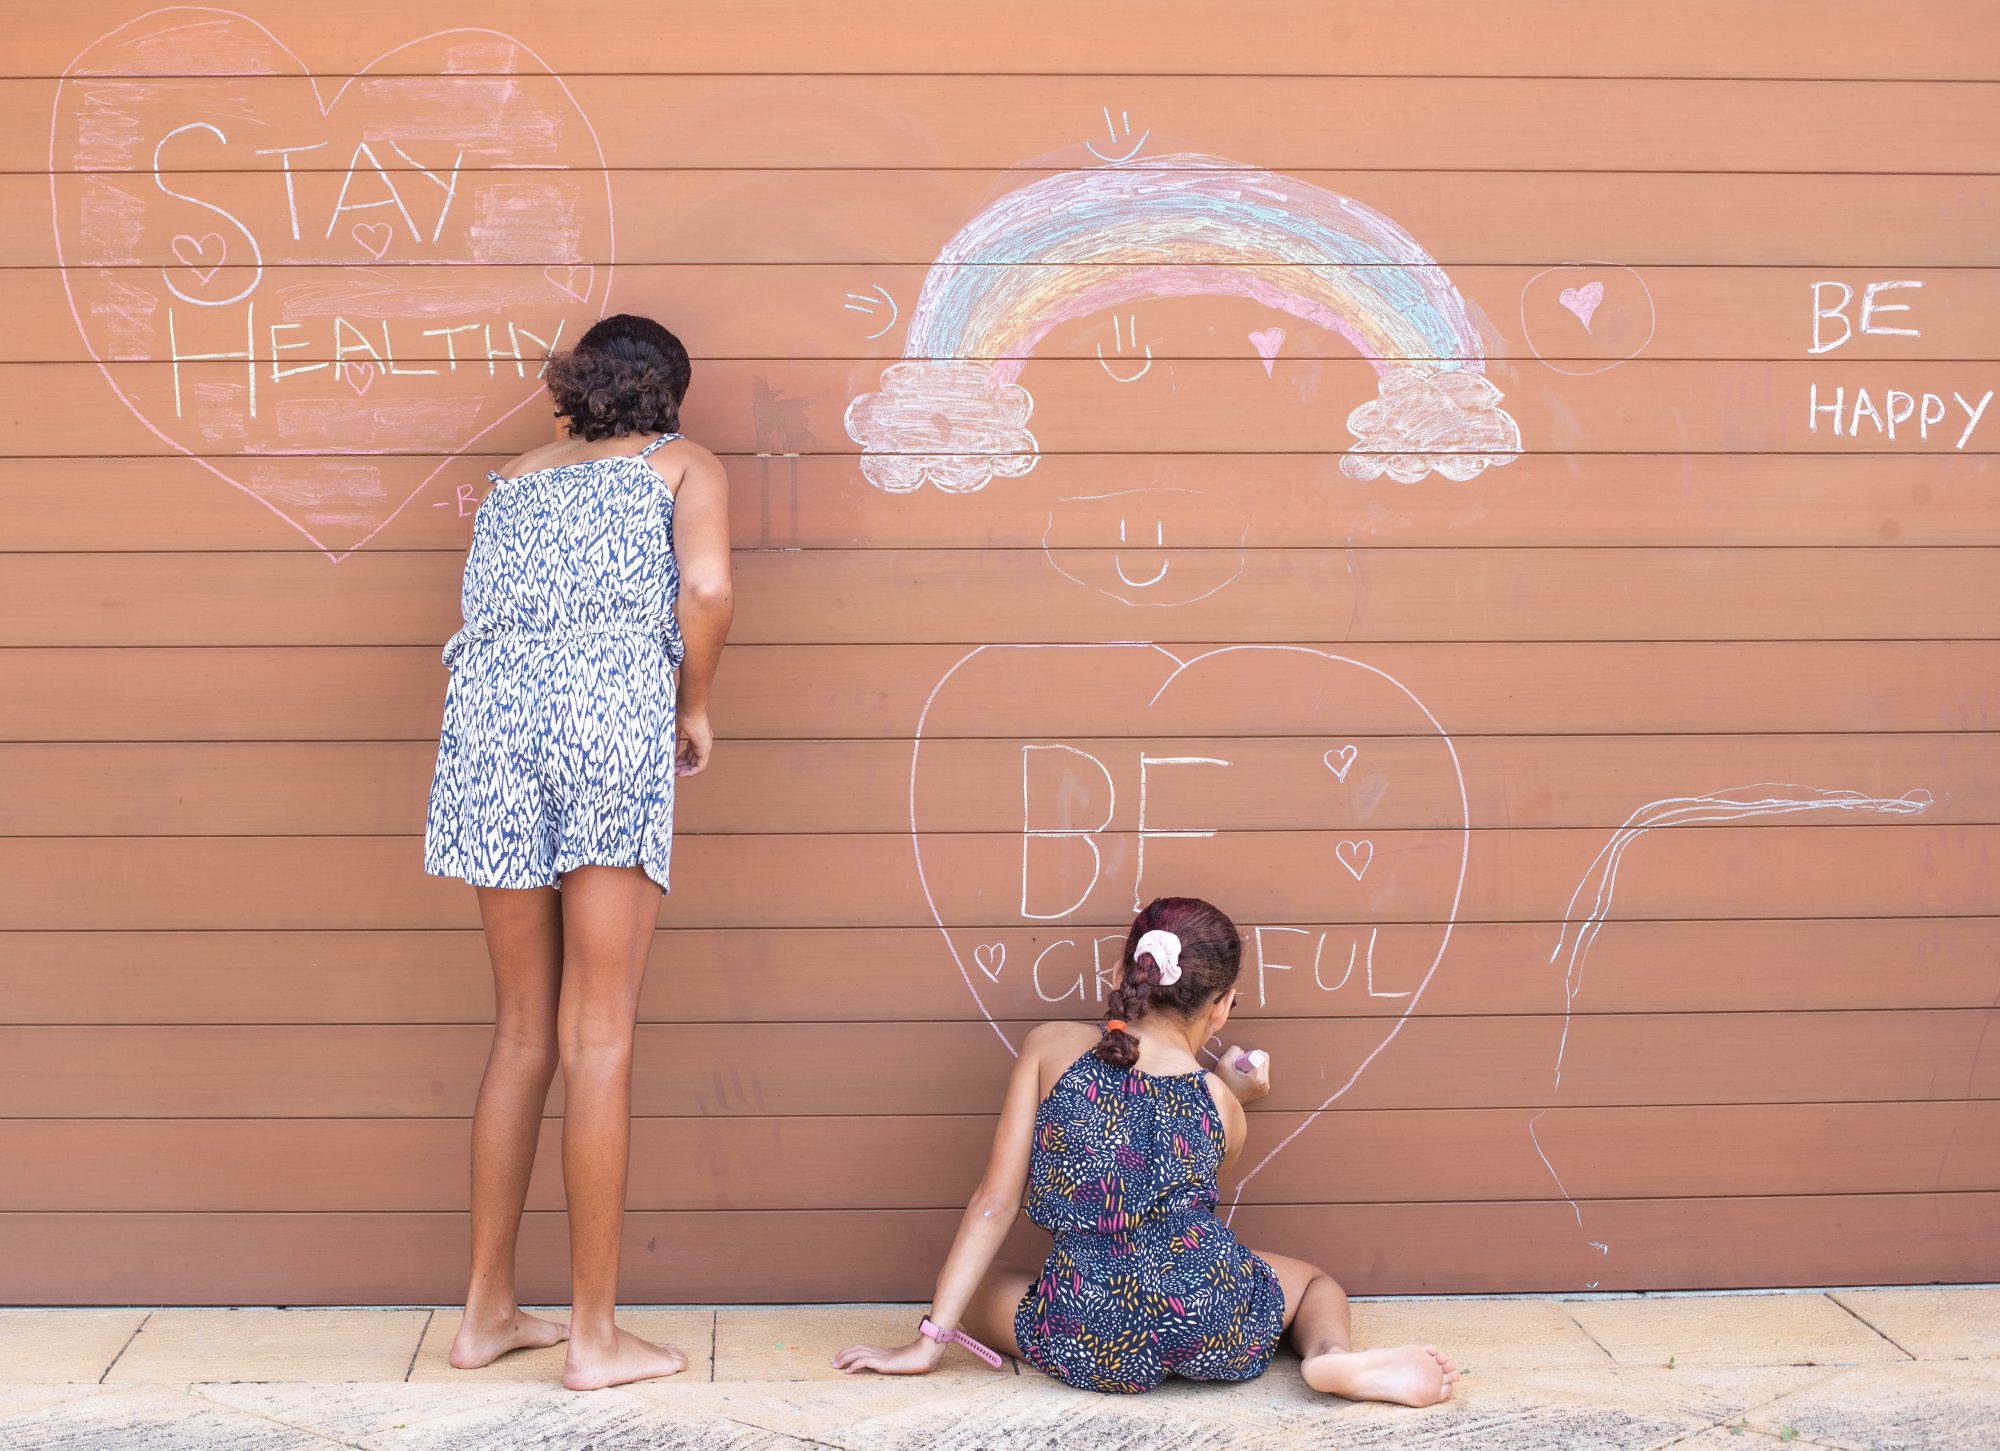 An image of two girls drawing with chalk.